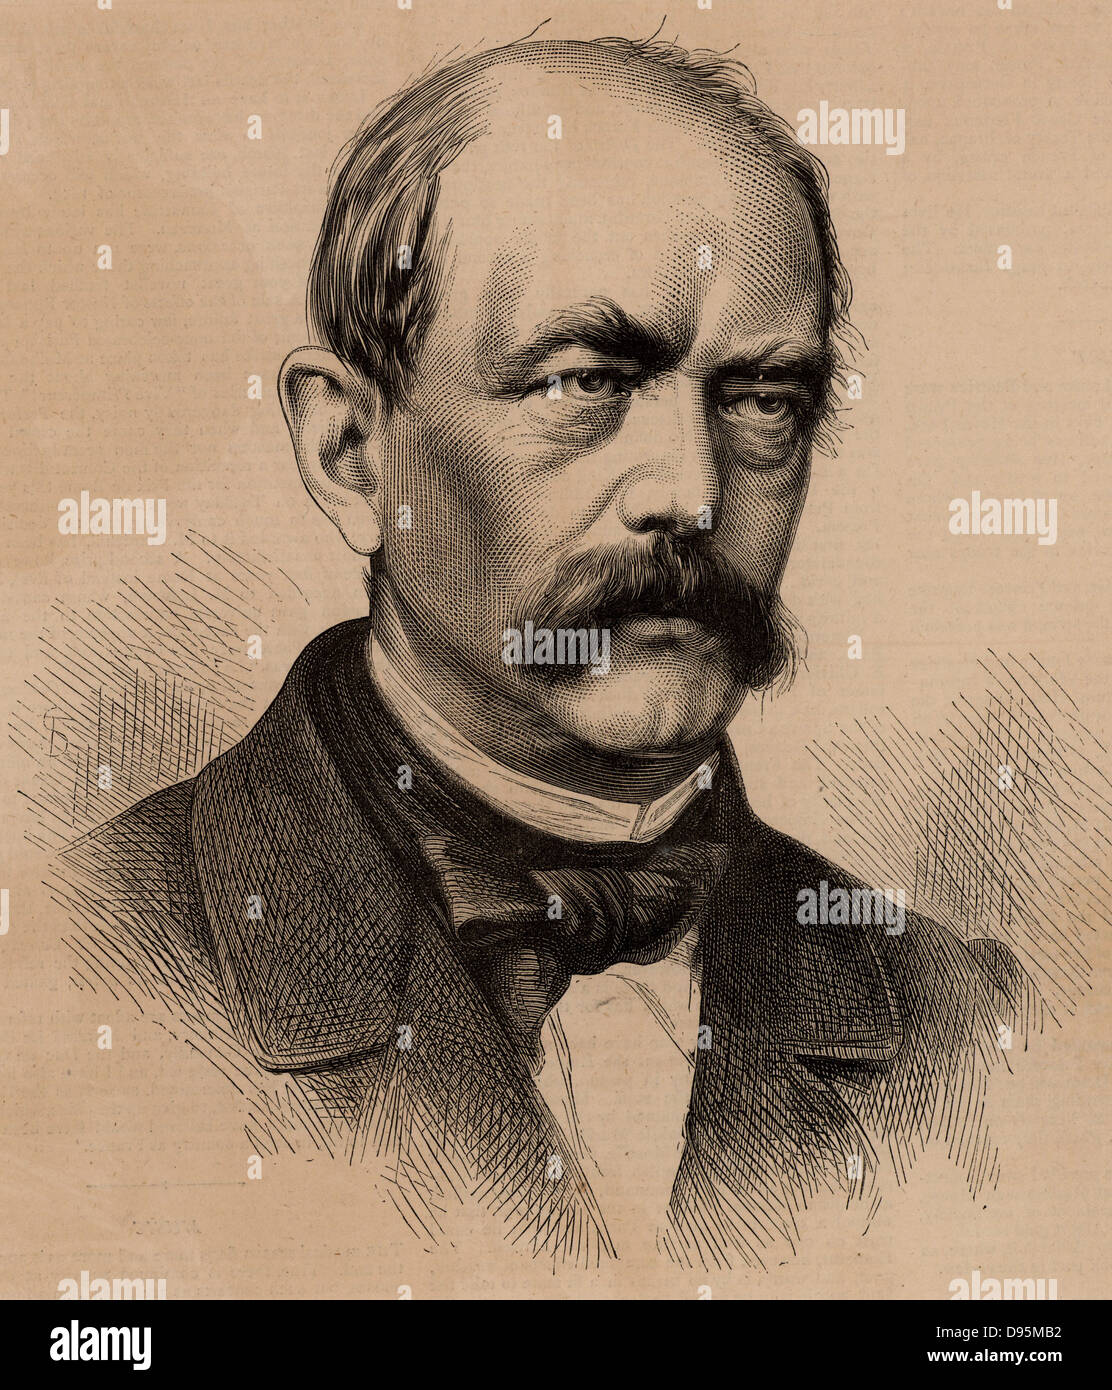 Otto Edward Leopold von Bismarck (1815-98) German/Prussian statesman.  Creator of modern Germany and Chancellor of Germany 1871-1890. Portrait engraving  published in 1886, the year of German reorganisation. From 'The Illustrated London News' (London, 1866. Stock Photo